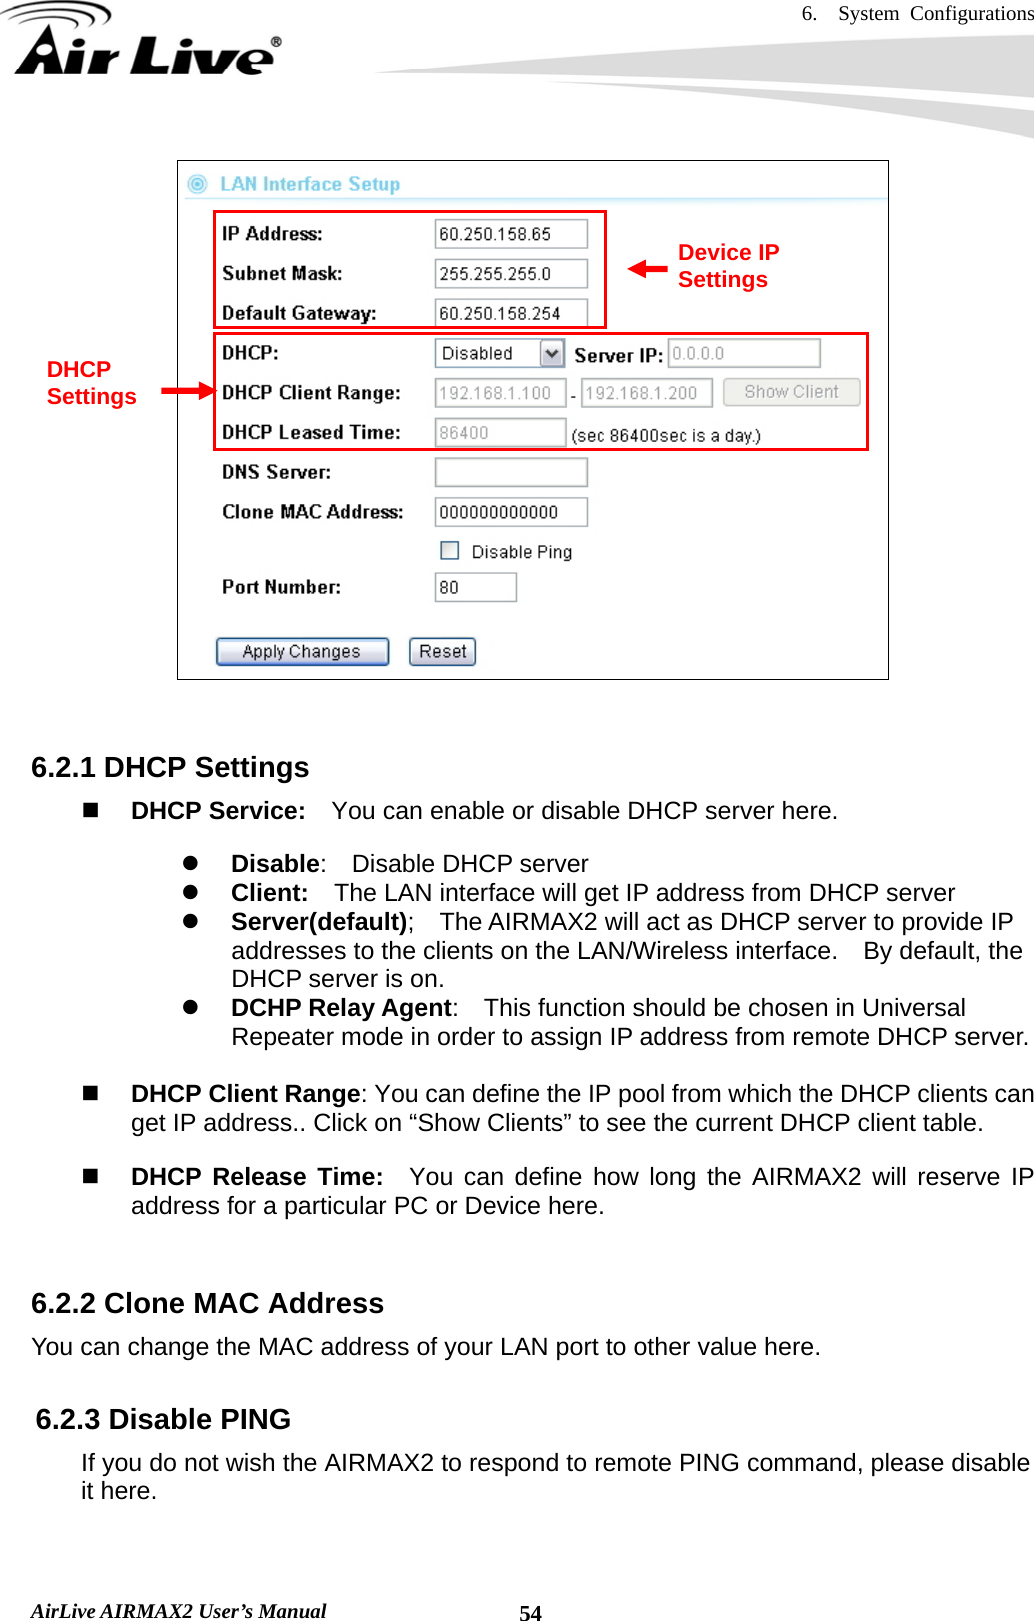 6.  System Configurations   AirLive AIRMAX2 User’s Manual  54   6.2.1 DHCP Settings  DHCP Service:    You can enable or disable DHCP server here. z Disable:  Disable DHCP server z Client:    The LAN interface will get IP address from DHCP server z Server(default);    The AIRMAX2 will act as DHCP server to provide IP addresses to the clients on the LAN/Wireless interface.    By default, the DHCP server is on. z DCHP Relay Agent:    This function should be chosen in Universal Repeater mode in order to assign IP address from remote DHCP server.   DHCP Client Range: You can define the IP pool from which the DHCP clients can get IP address.. Click on “Show Clients” to see the current DHCP client table.  DHCP Release Time:  You can define how long the AIRMAX2 will reserve IP address for a particular PC or Device here.  6.2.2 Clone MAC Address You can change the MAC address of your LAN port to other value here.  6.2.3 Disable PING If you do not wish the AIRMAX2 to respond to remote PING command, please disable it here. Device IP Settings DHCP Settings 